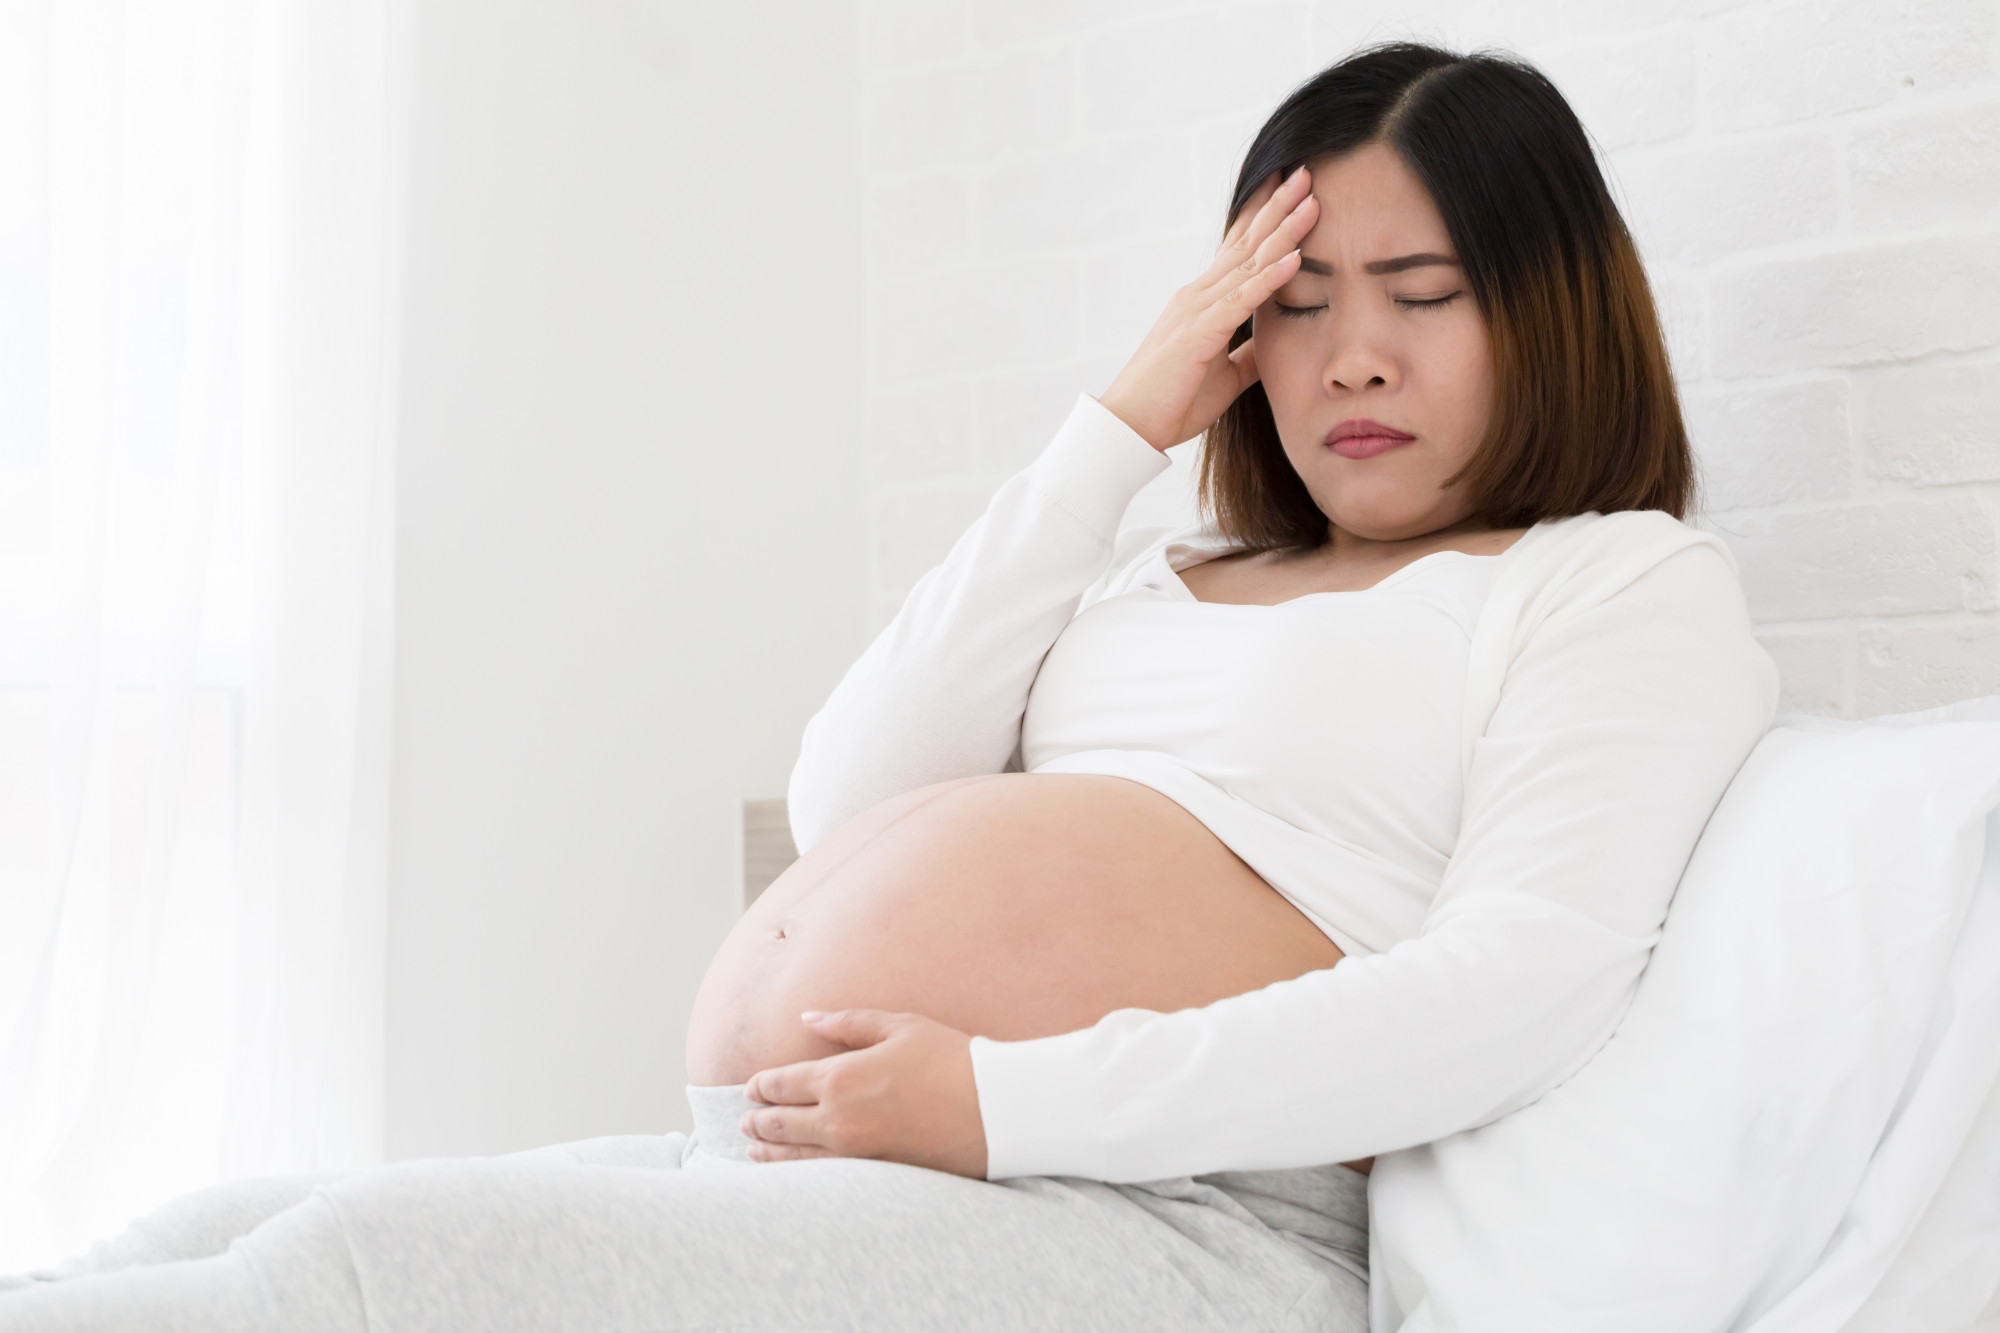 Running While Pregnant: Is It Safe?